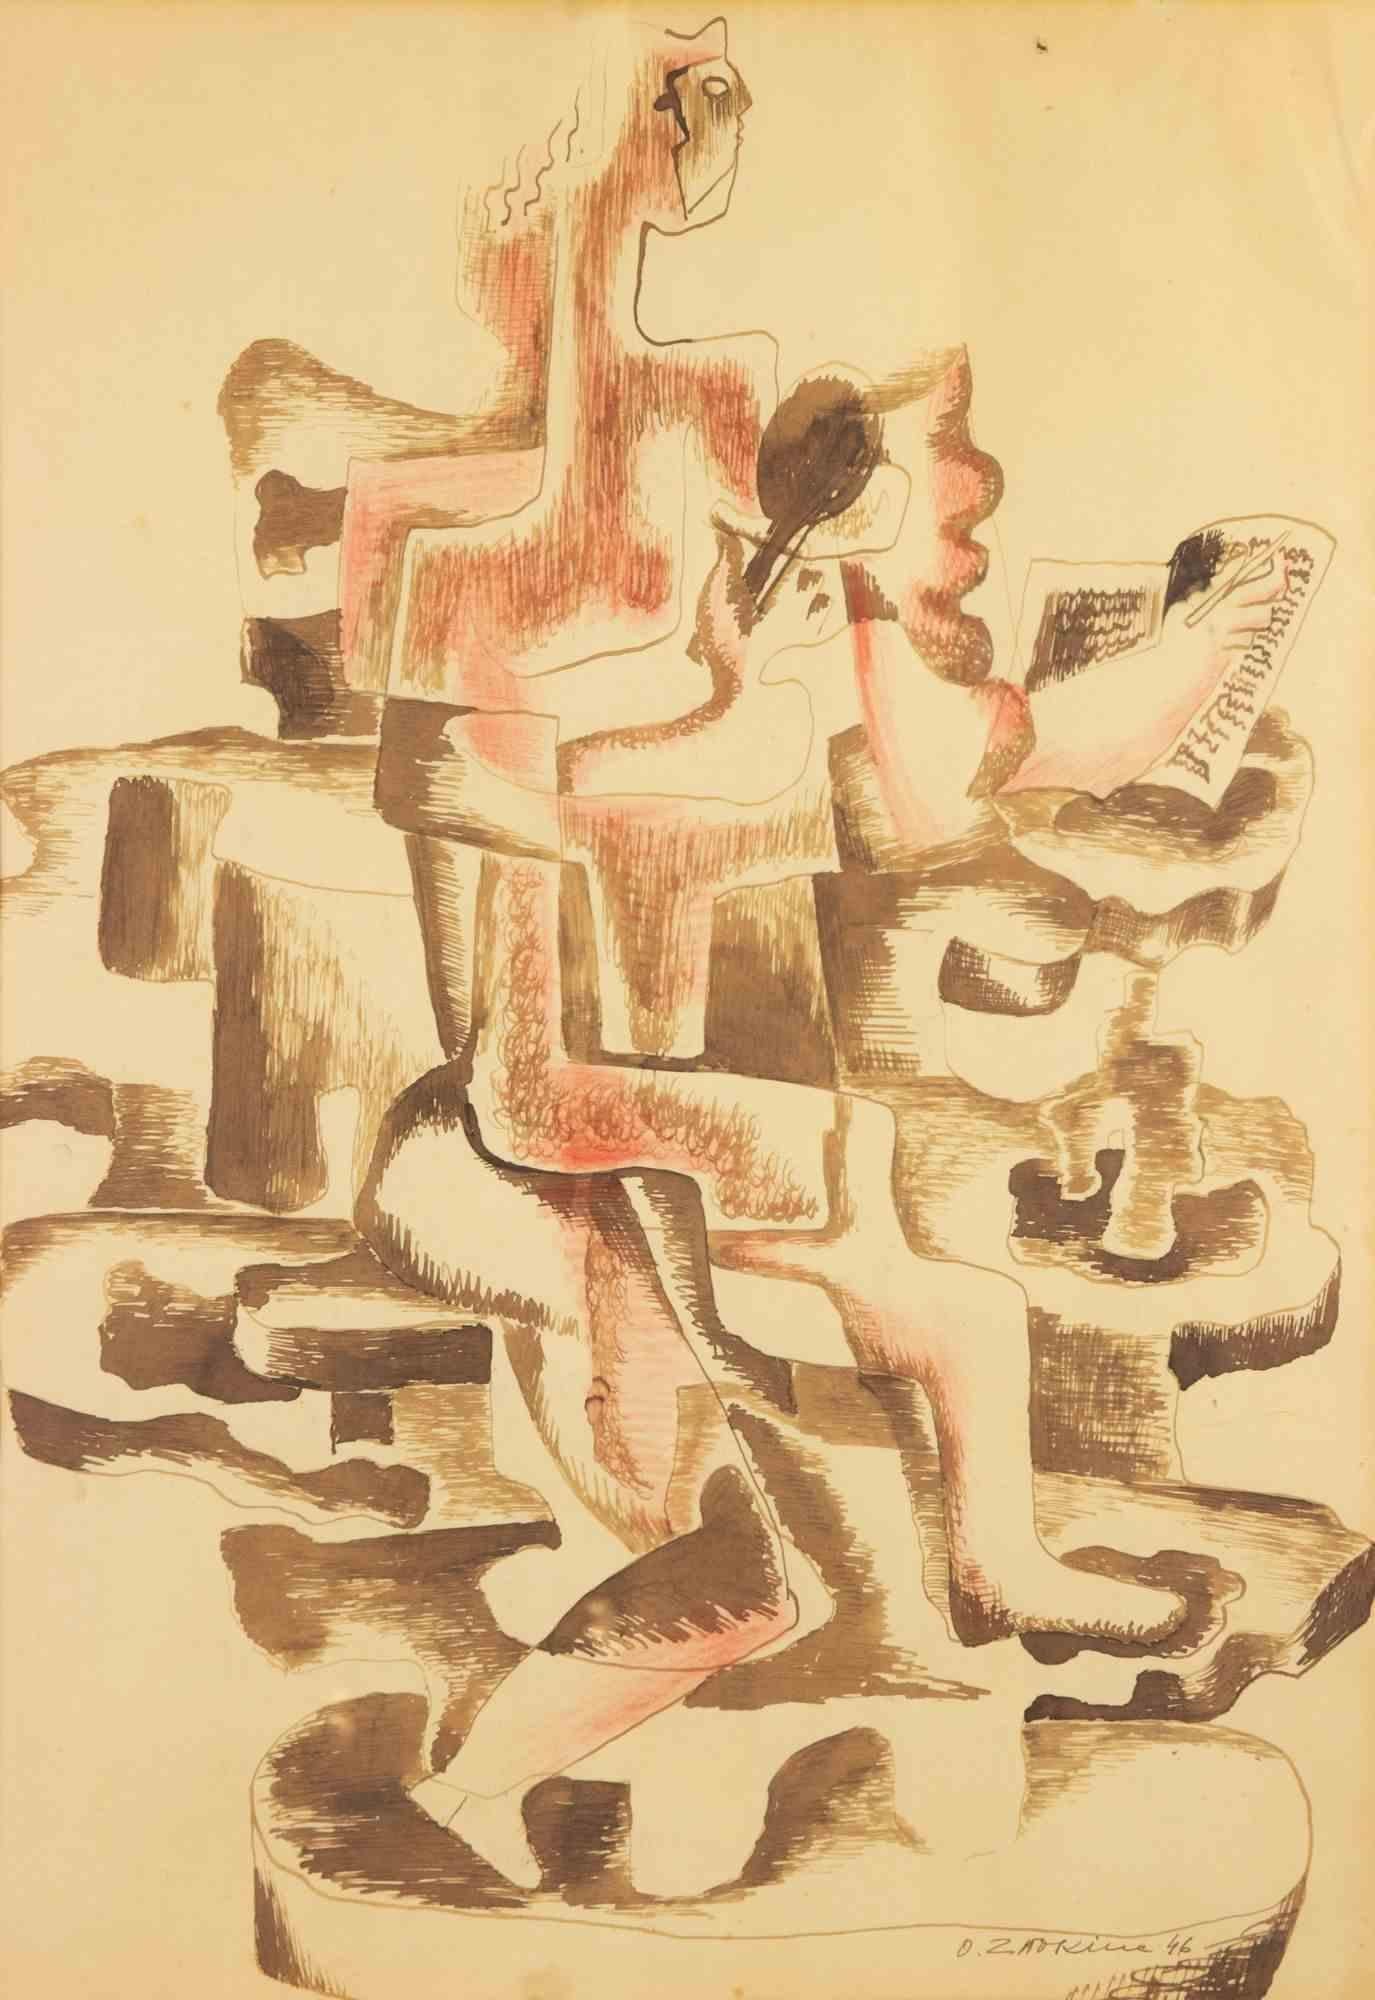 Untitled - Drawing by Ossip Zadkine - 1946